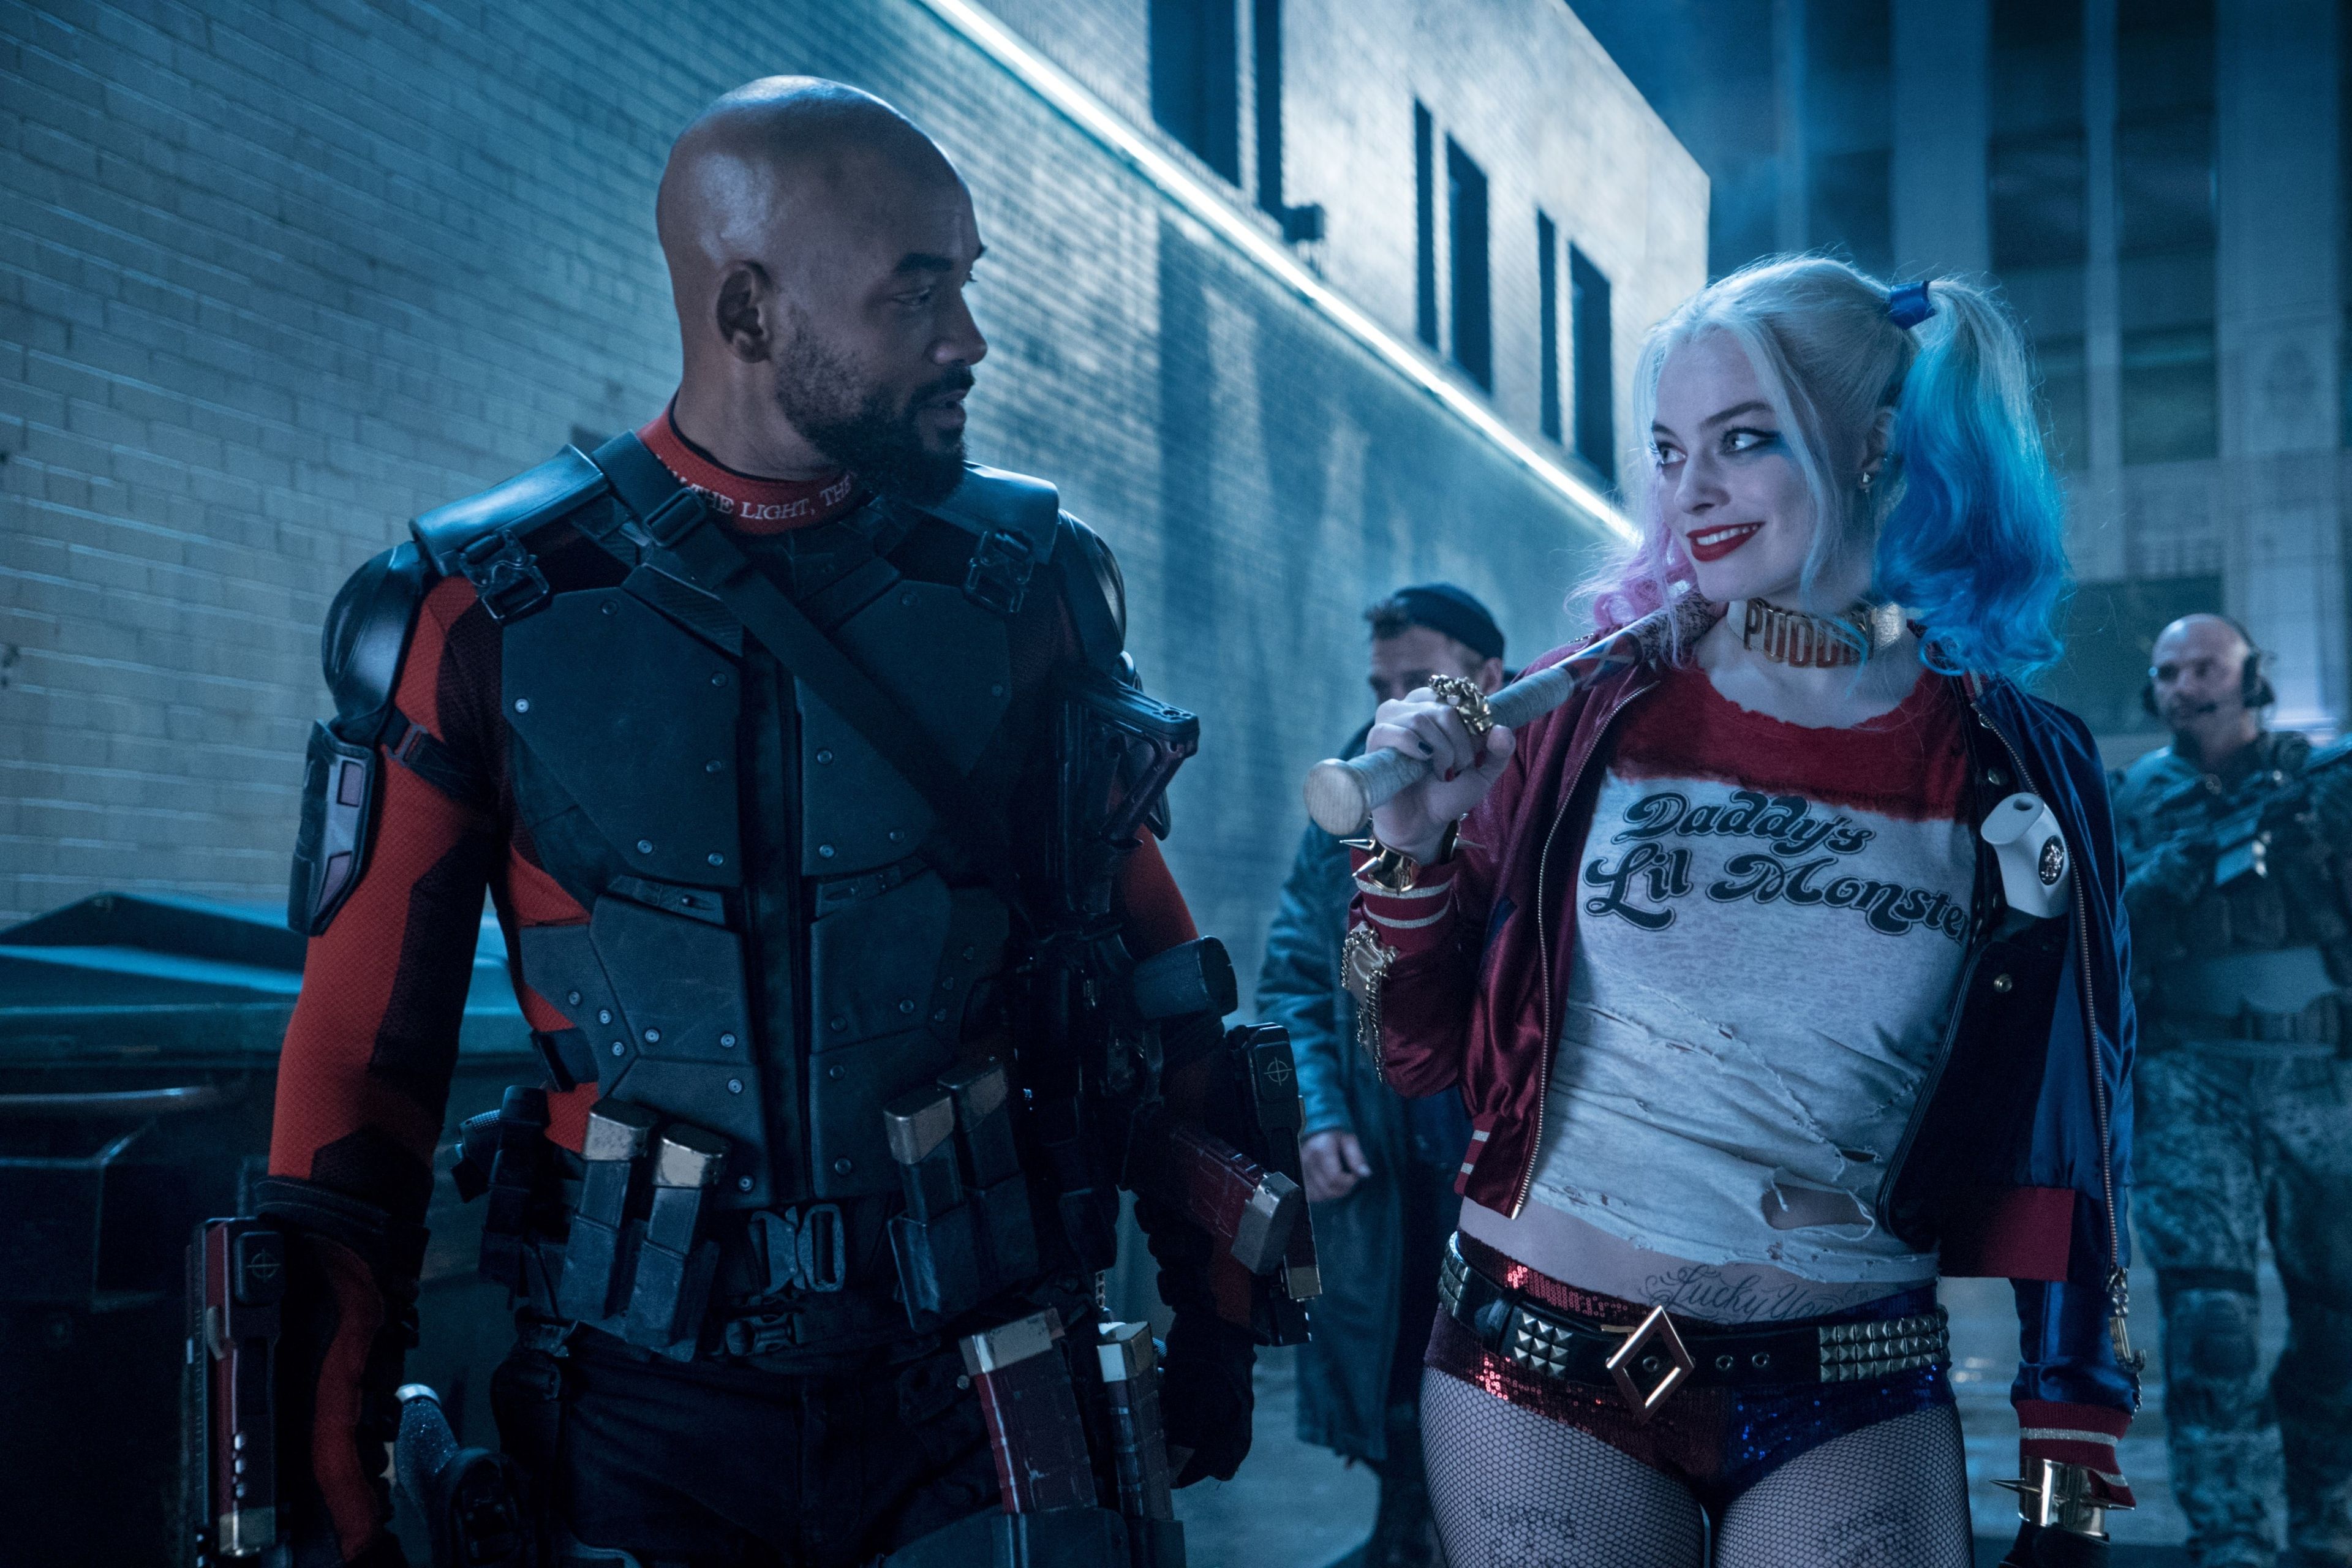 Suicide Squad (2016) Deadshot and Harley Quinn 4K UHD 3:2 3840x2560